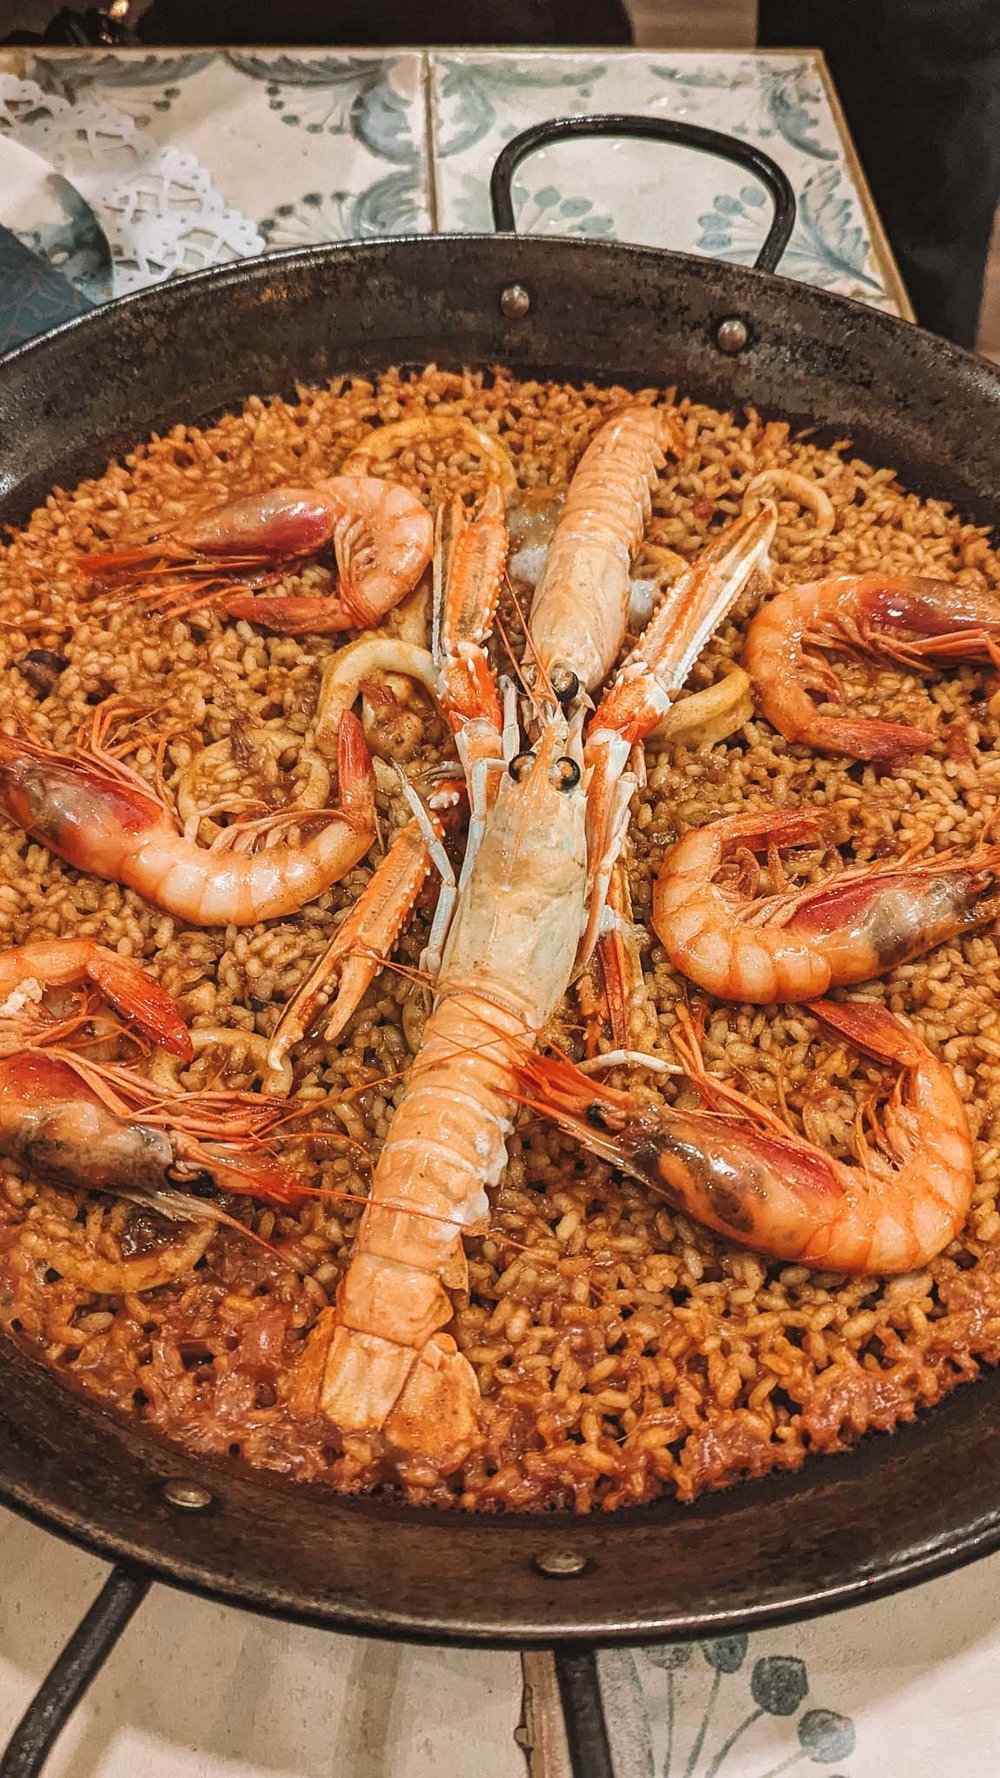 Where to eat Paella in Barcelona Spain